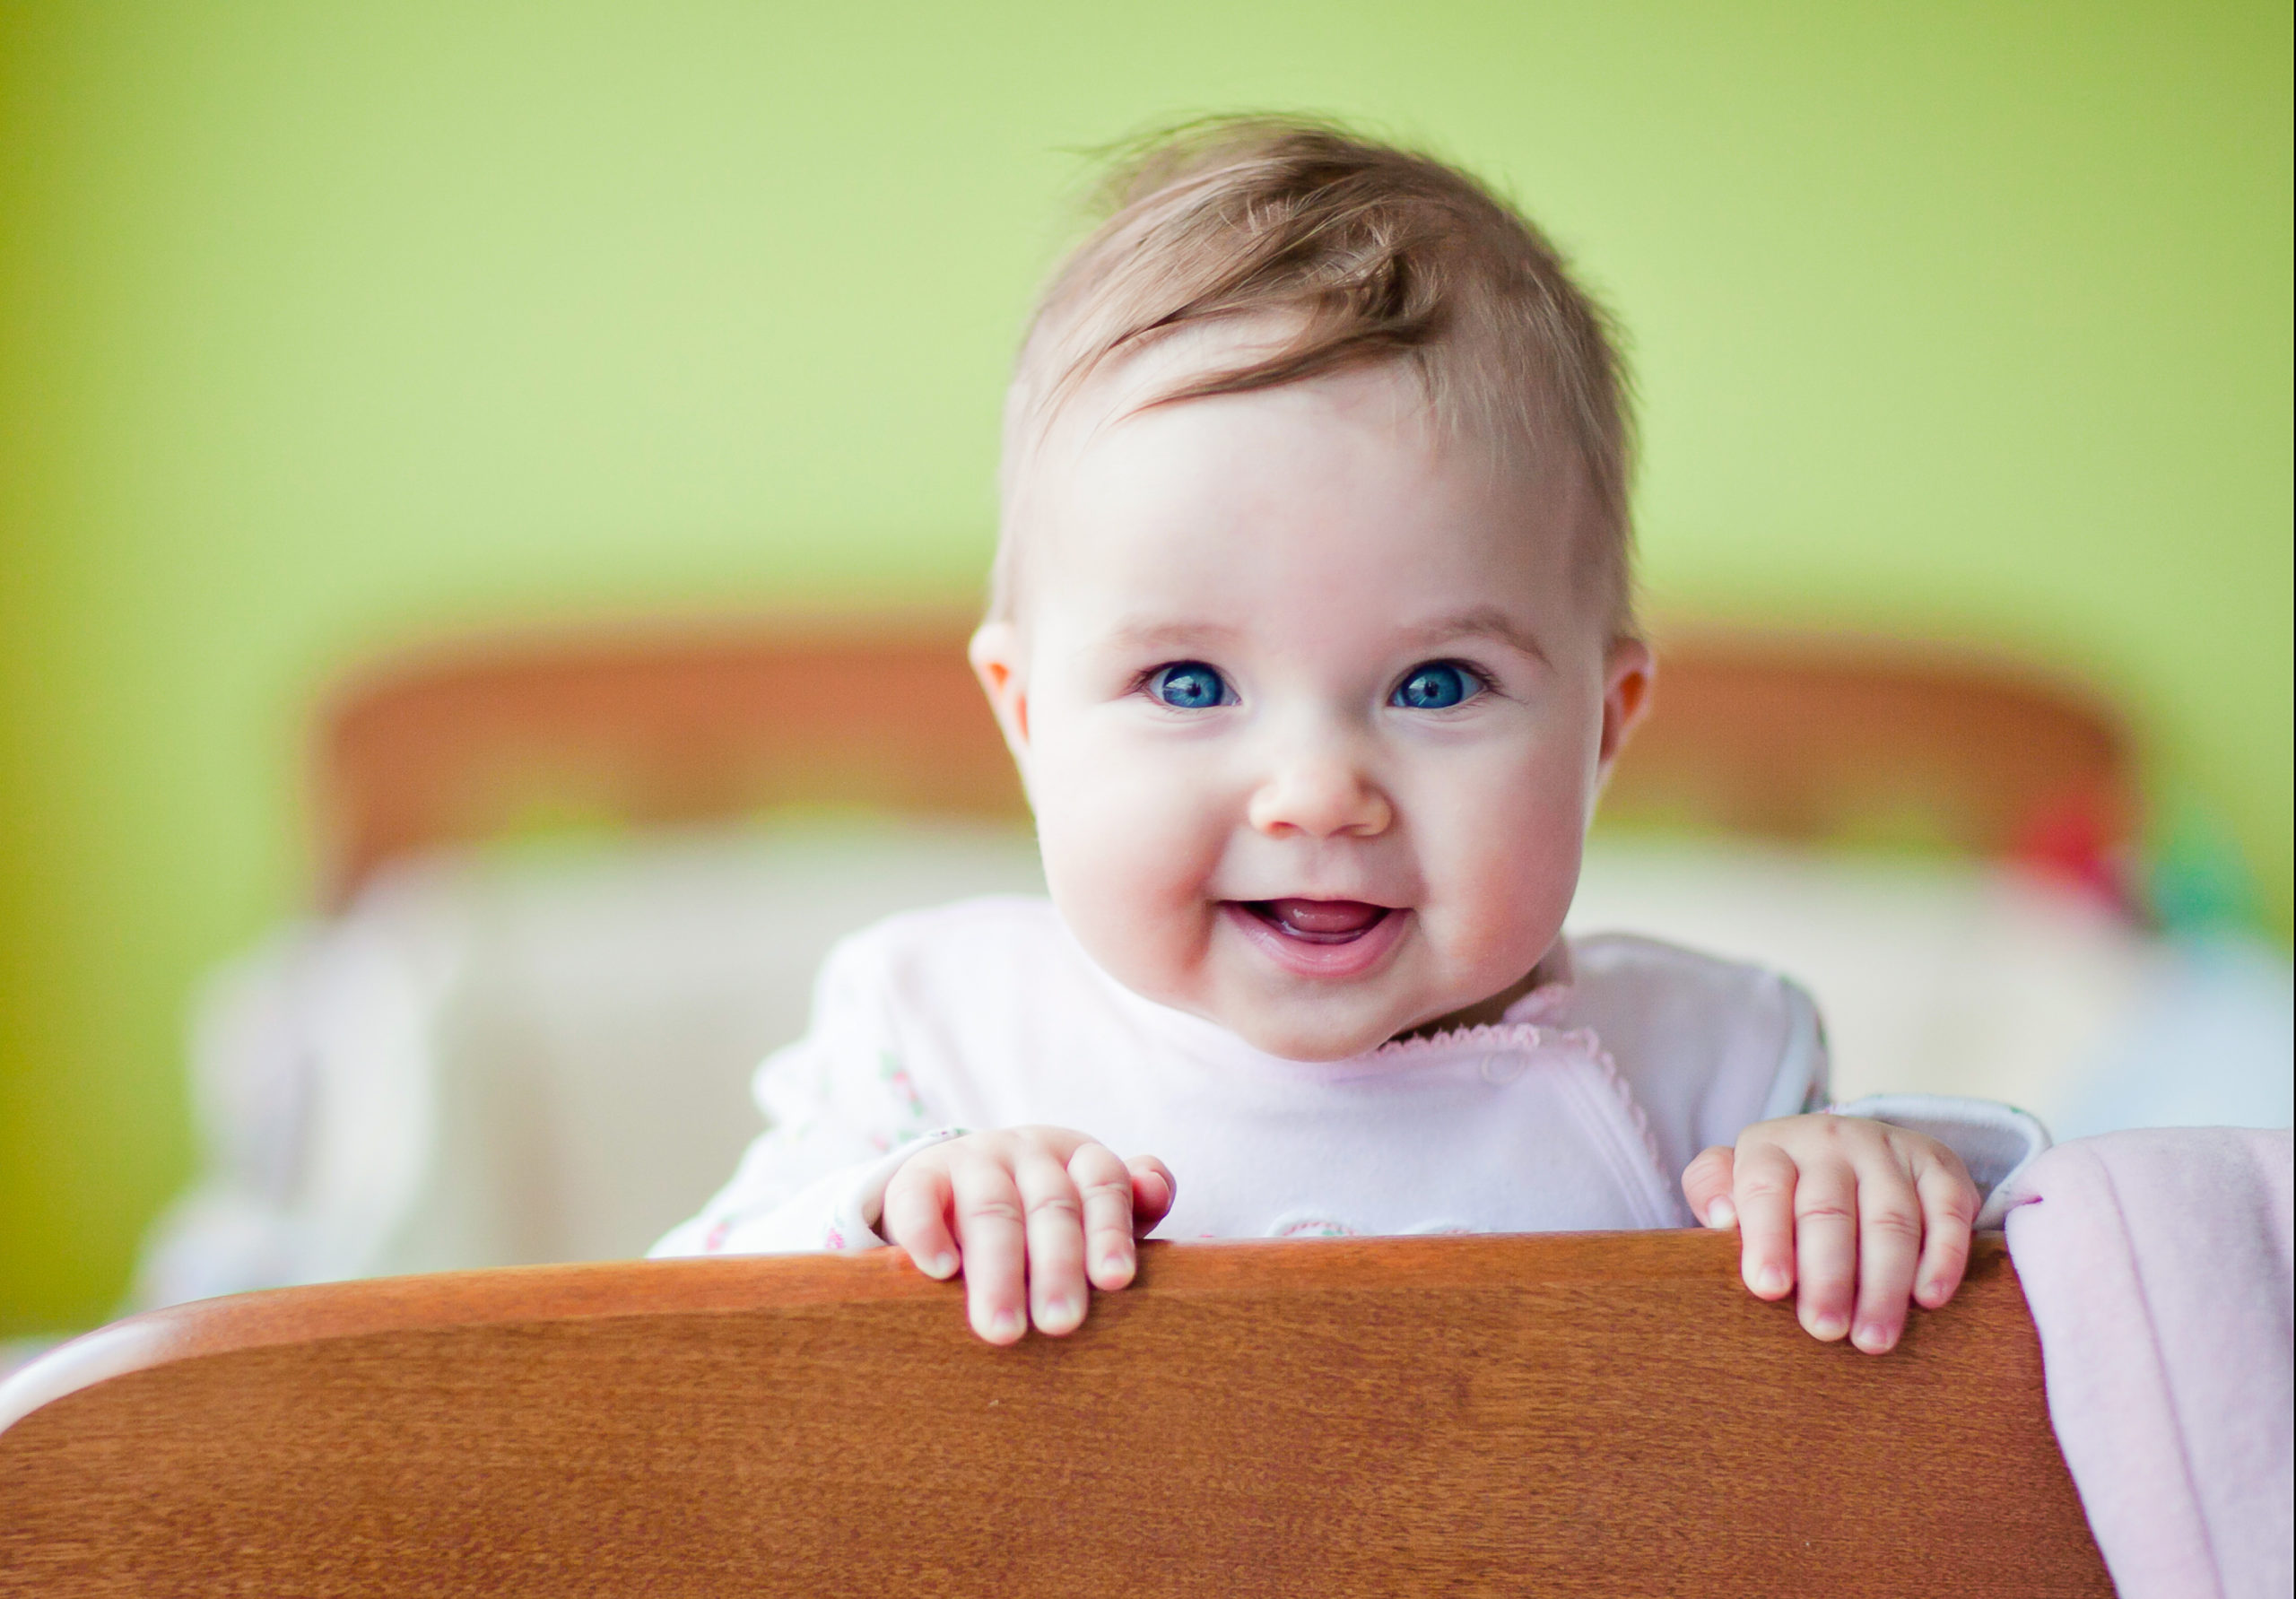 A very cute baby standing in her crib smiling